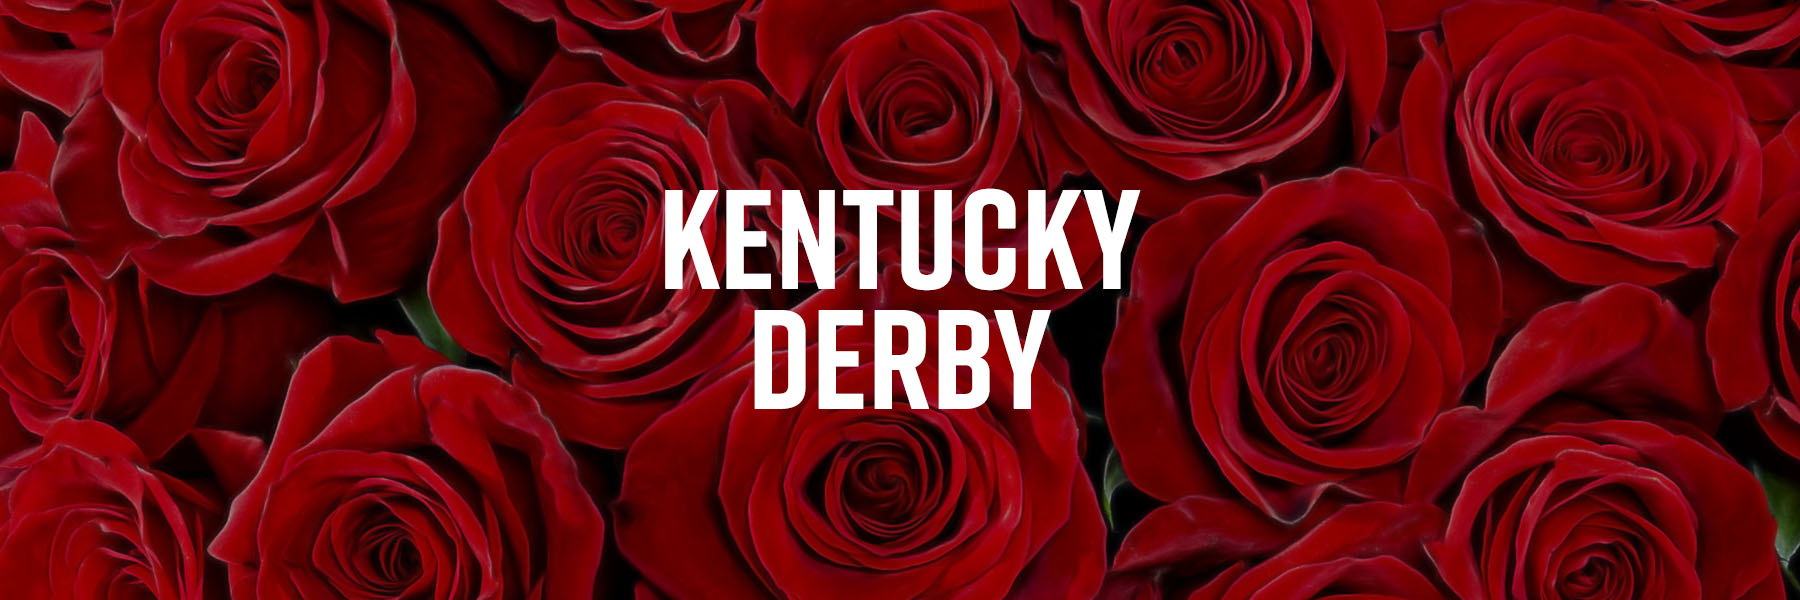 It’s Post Time by Jon White: A Kentucky Derby Embroiled in Controversy